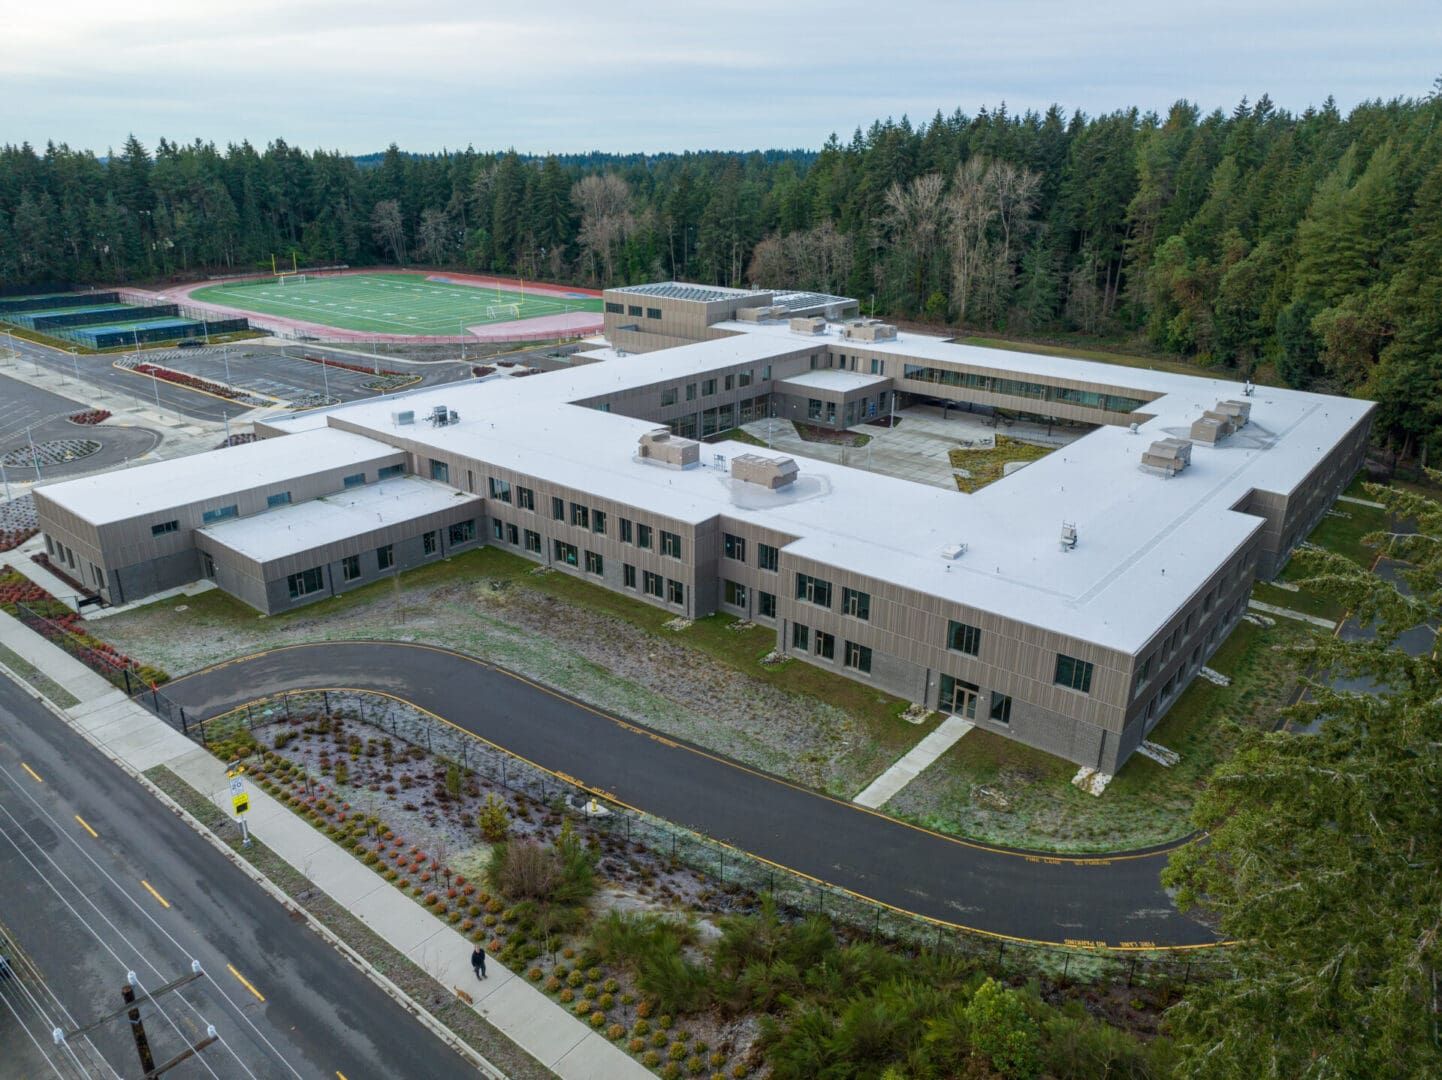 An aerial view of a school building in a forest.